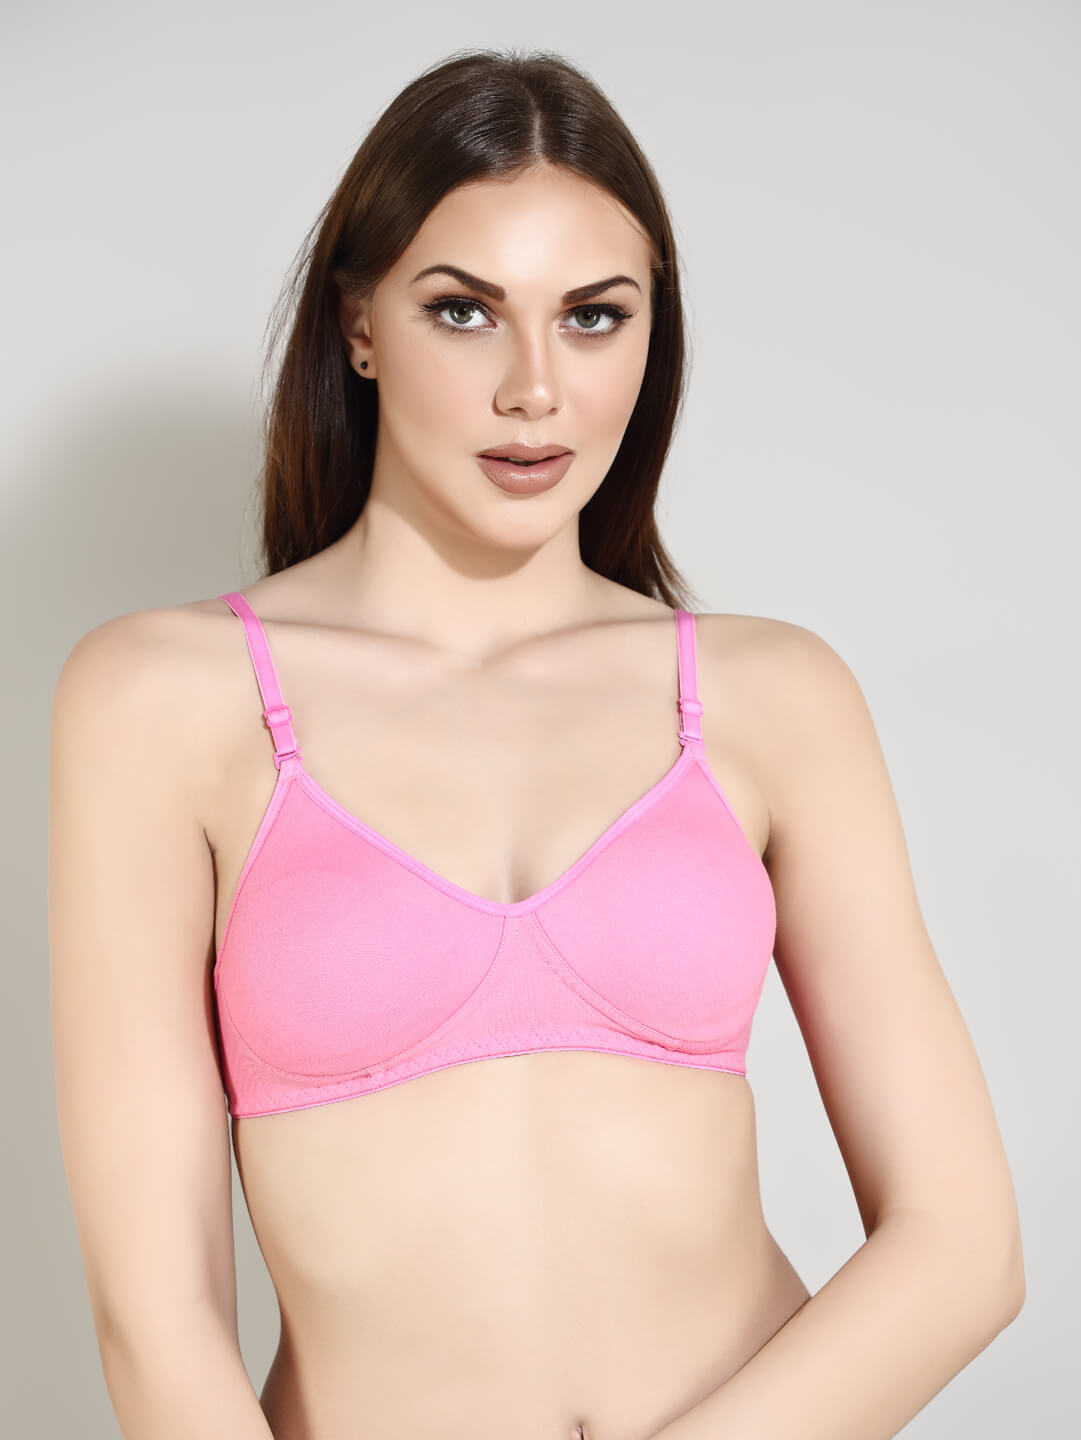 Floral Lace Cooling Bra - Buy 2 Free 1 – Marshmallow